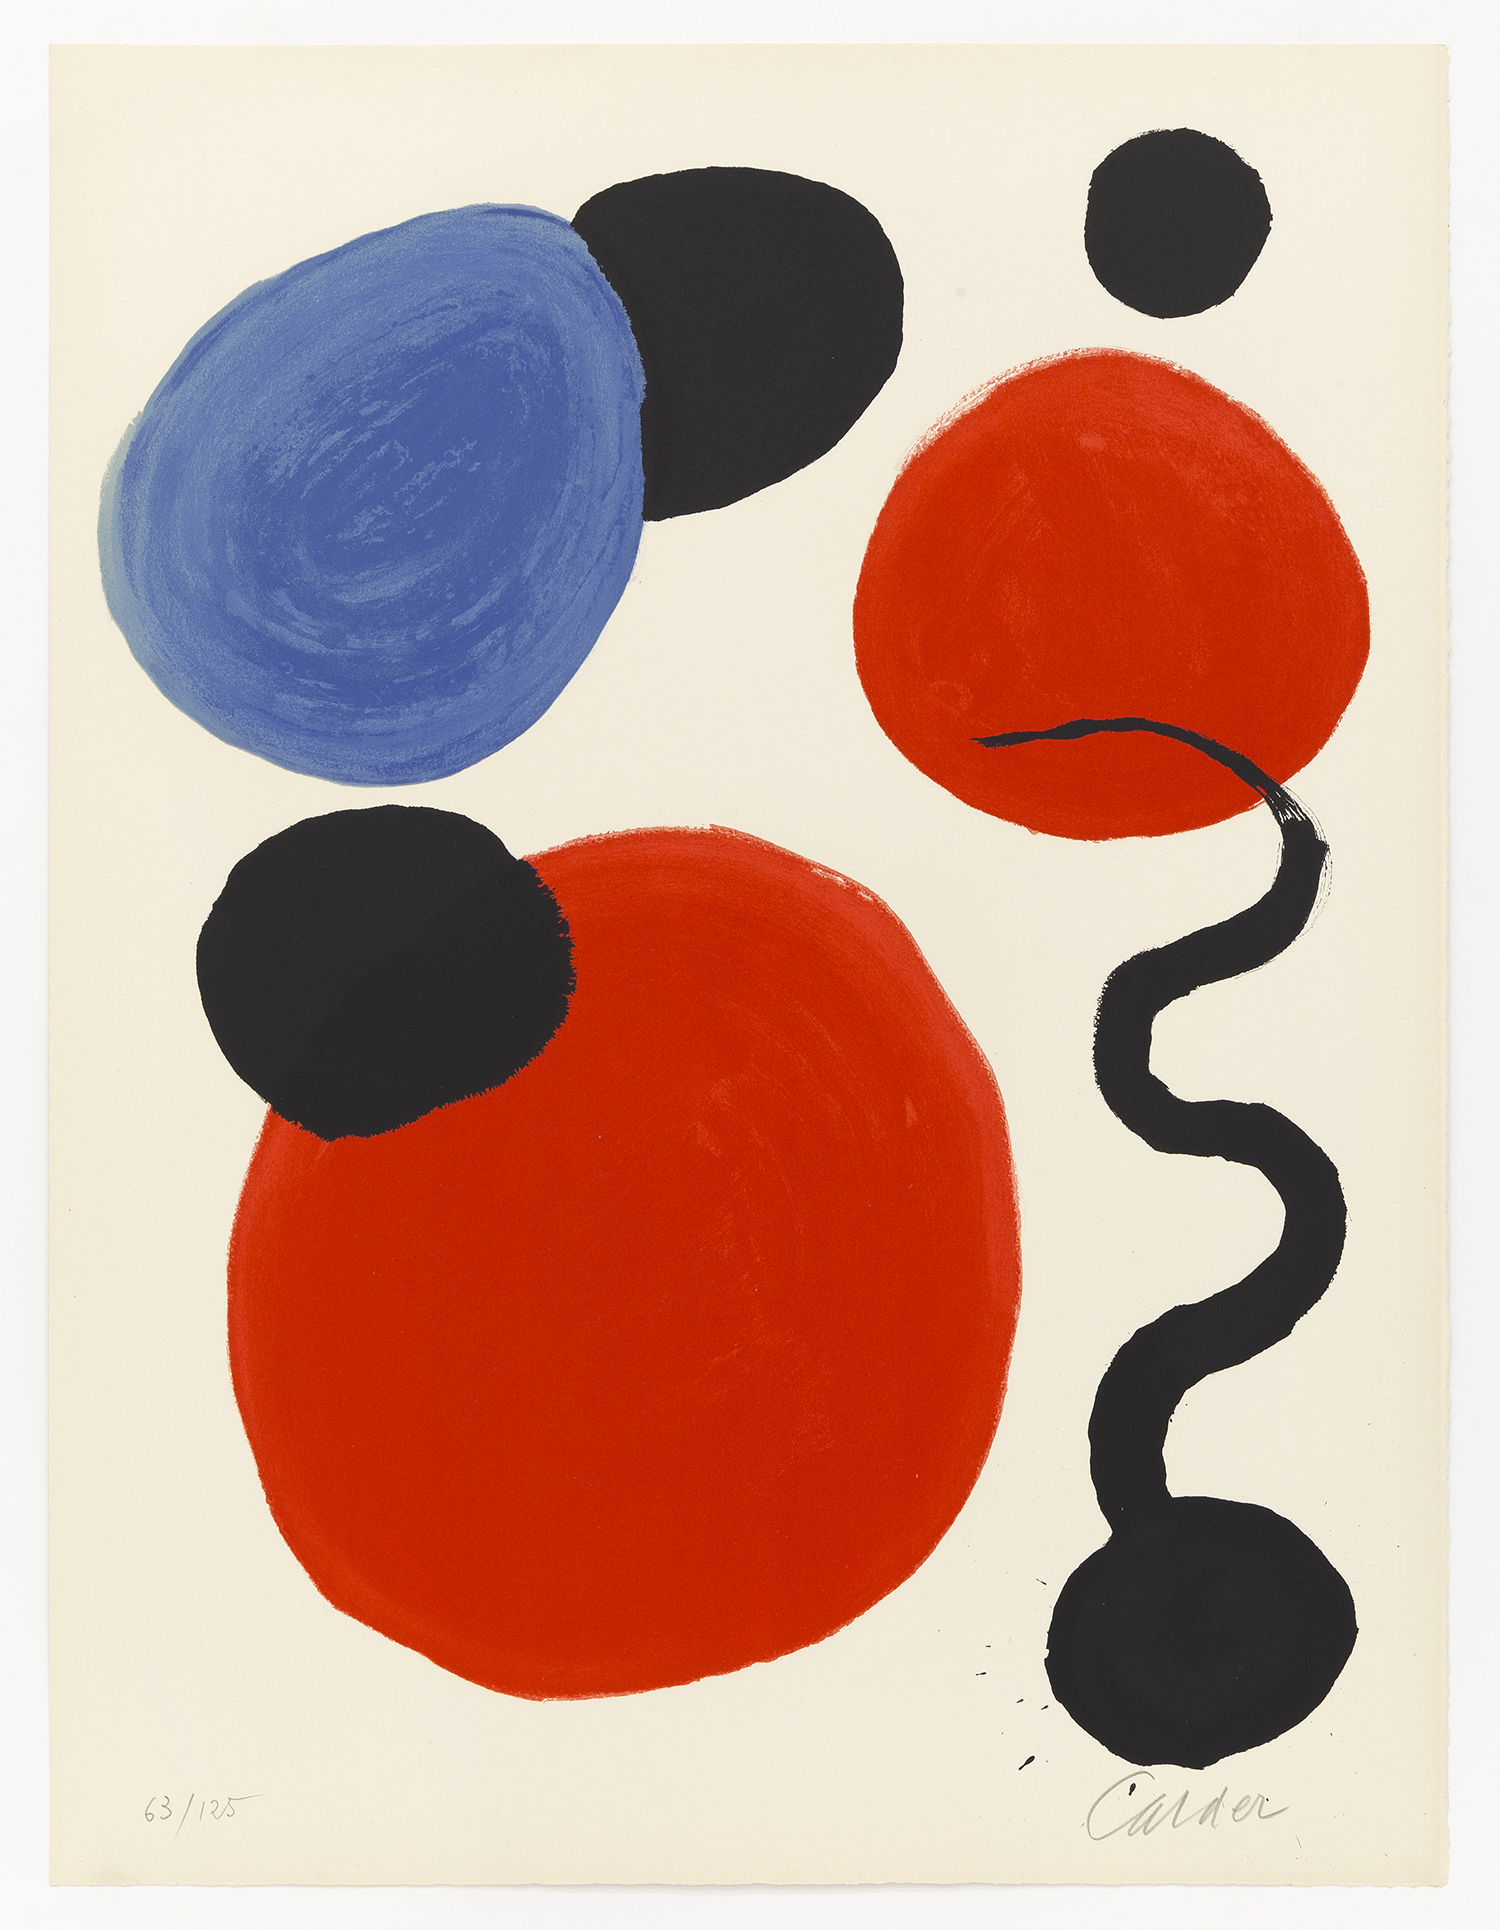 Circles, 1969, Lithograph, 26 3/4 x 20 1/2 inches (67.9 x 52.1 cm), Edition of 125